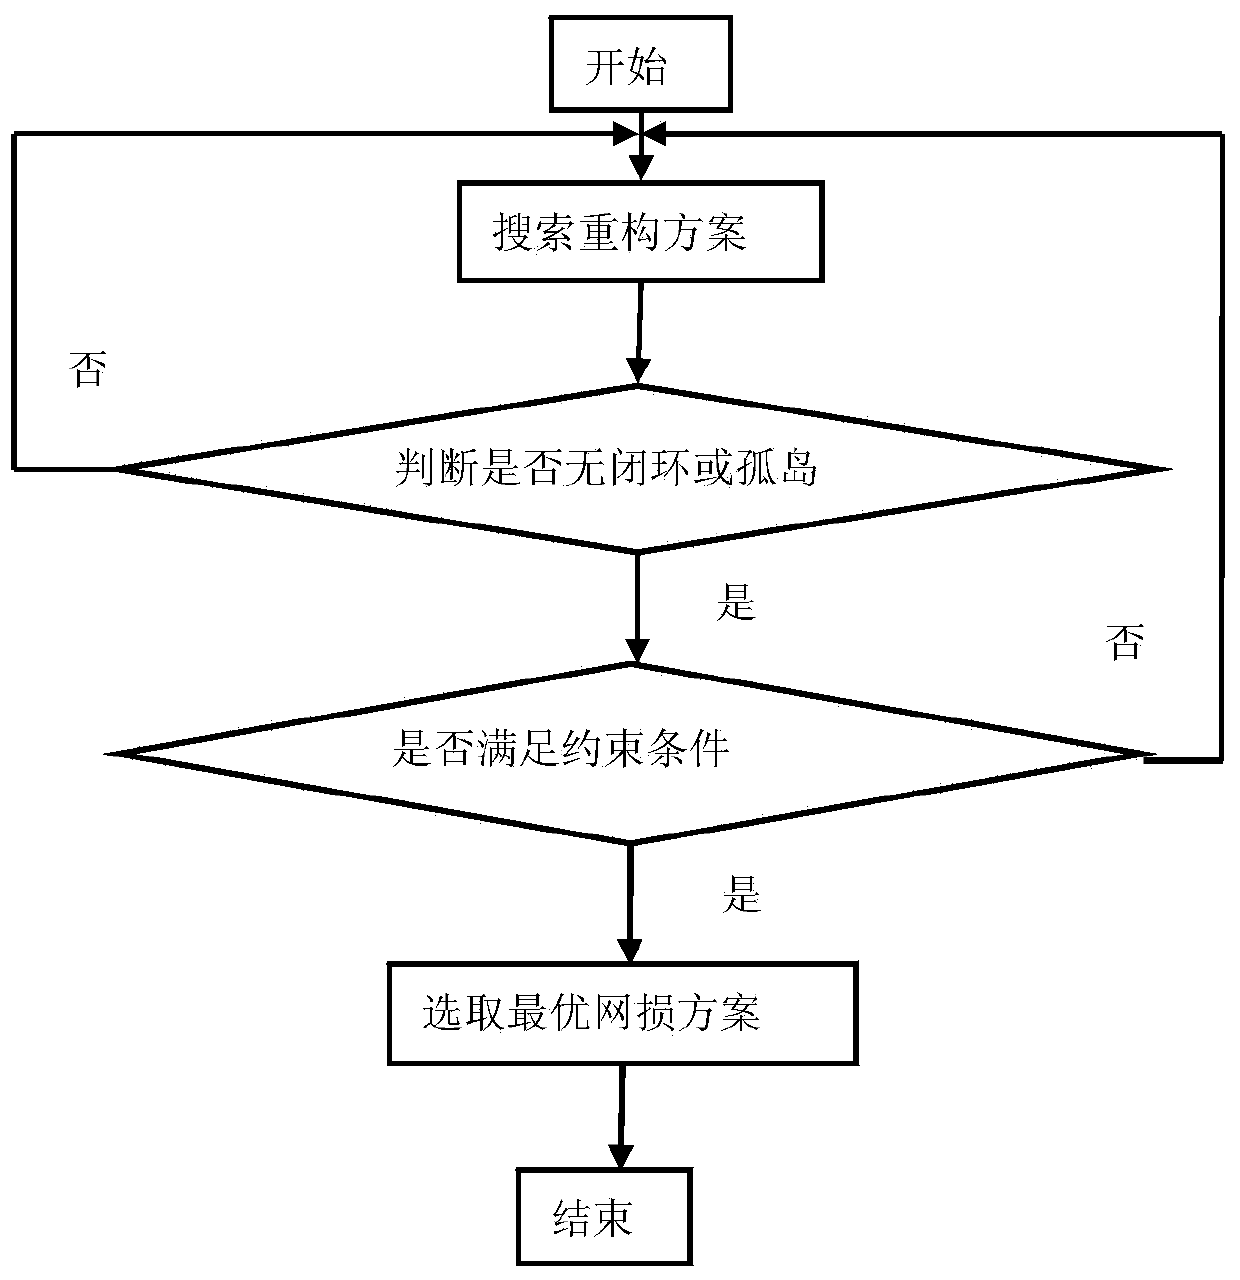 Self-recovery control method of intelligent distribution network